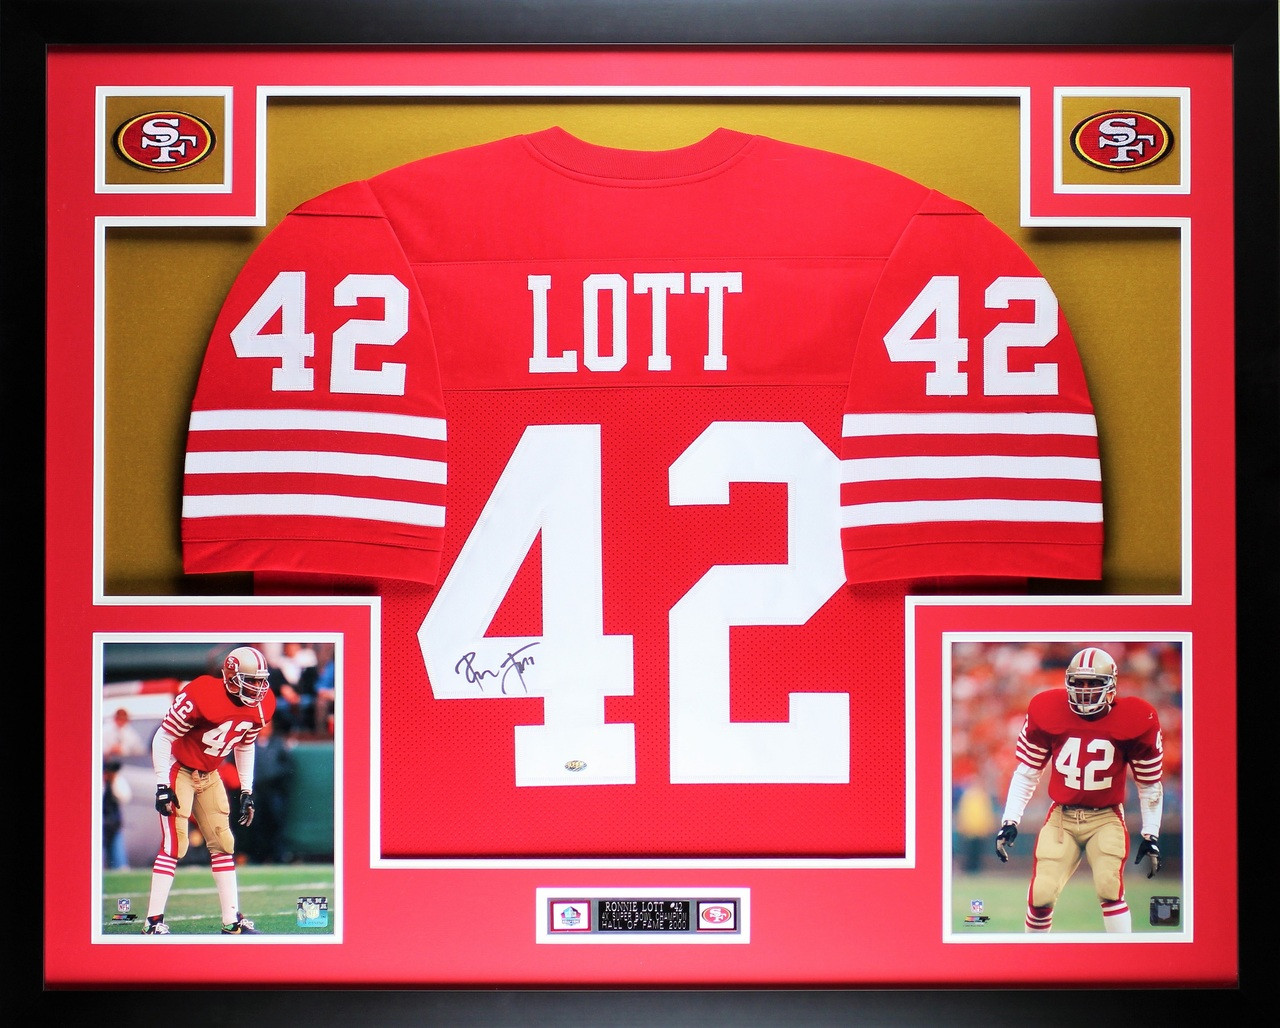 ronnie lott signed jersey